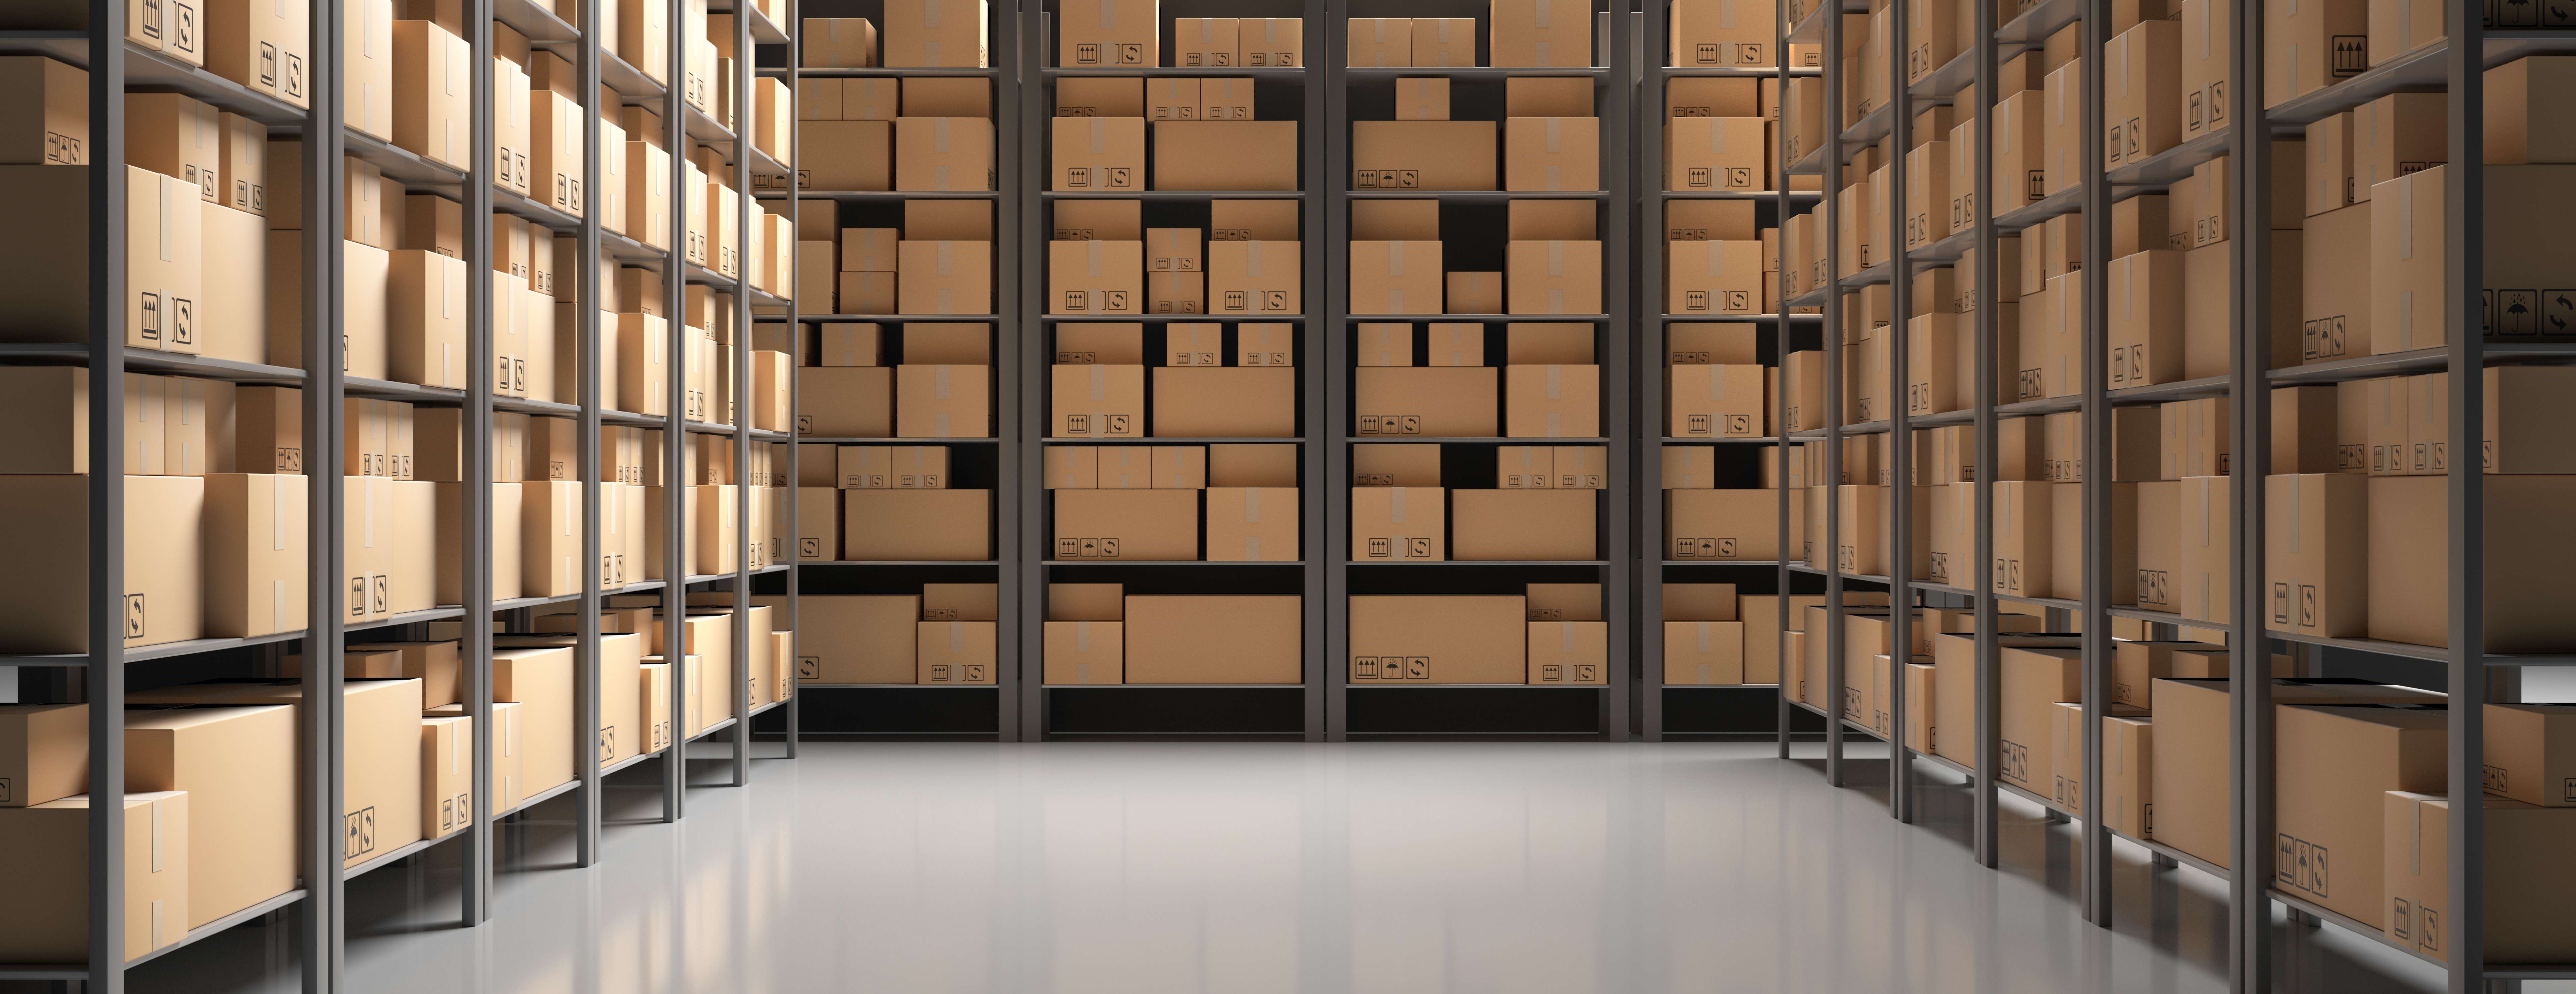 boxes stacked in a warehouse